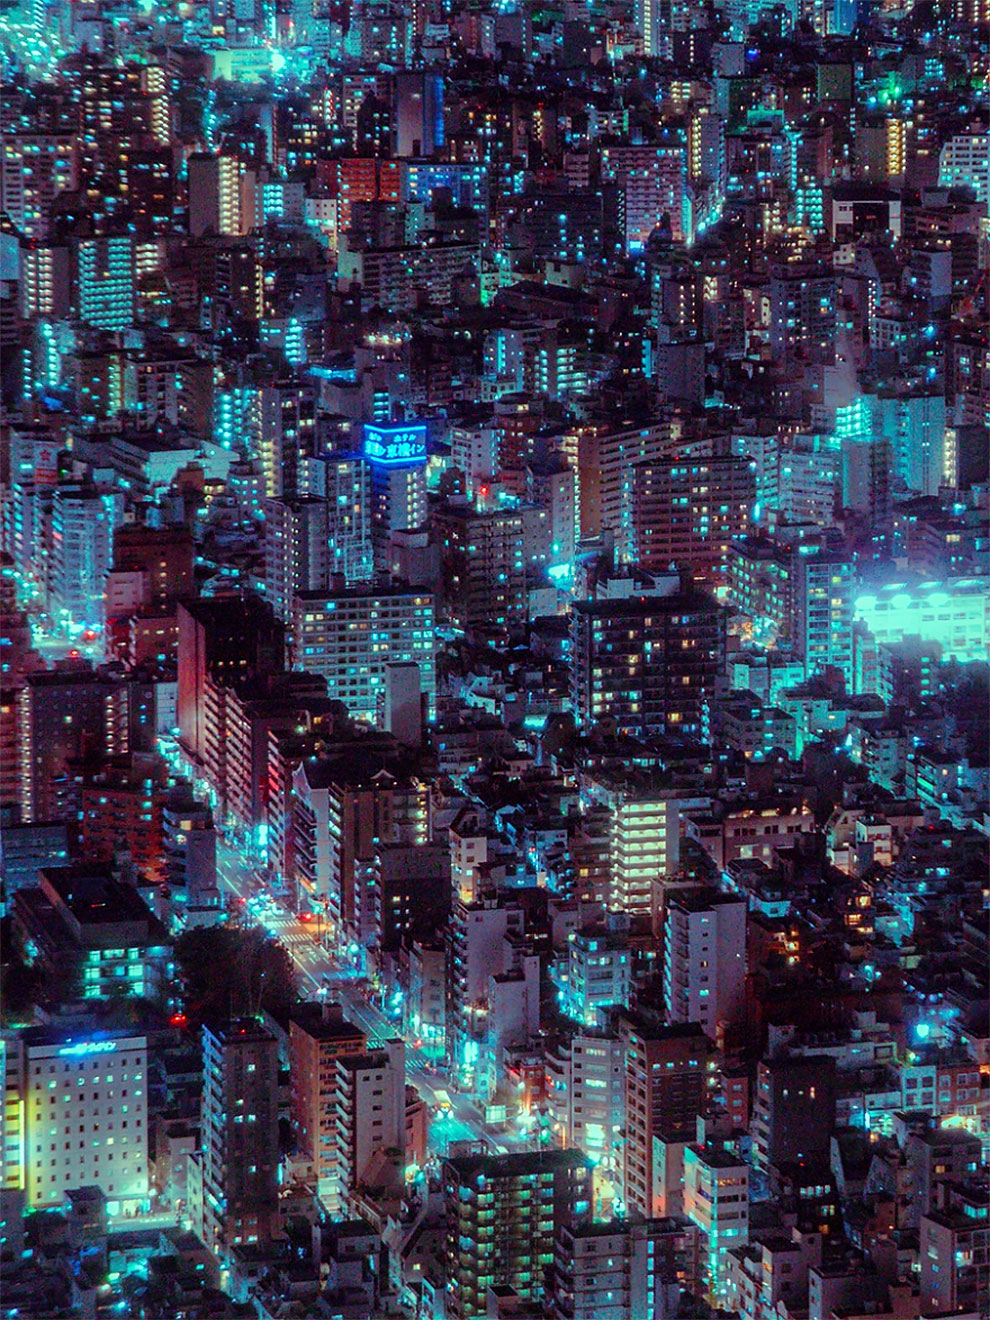 Photograher Captures Photos From The Highest Places In Tokyo Show The ...